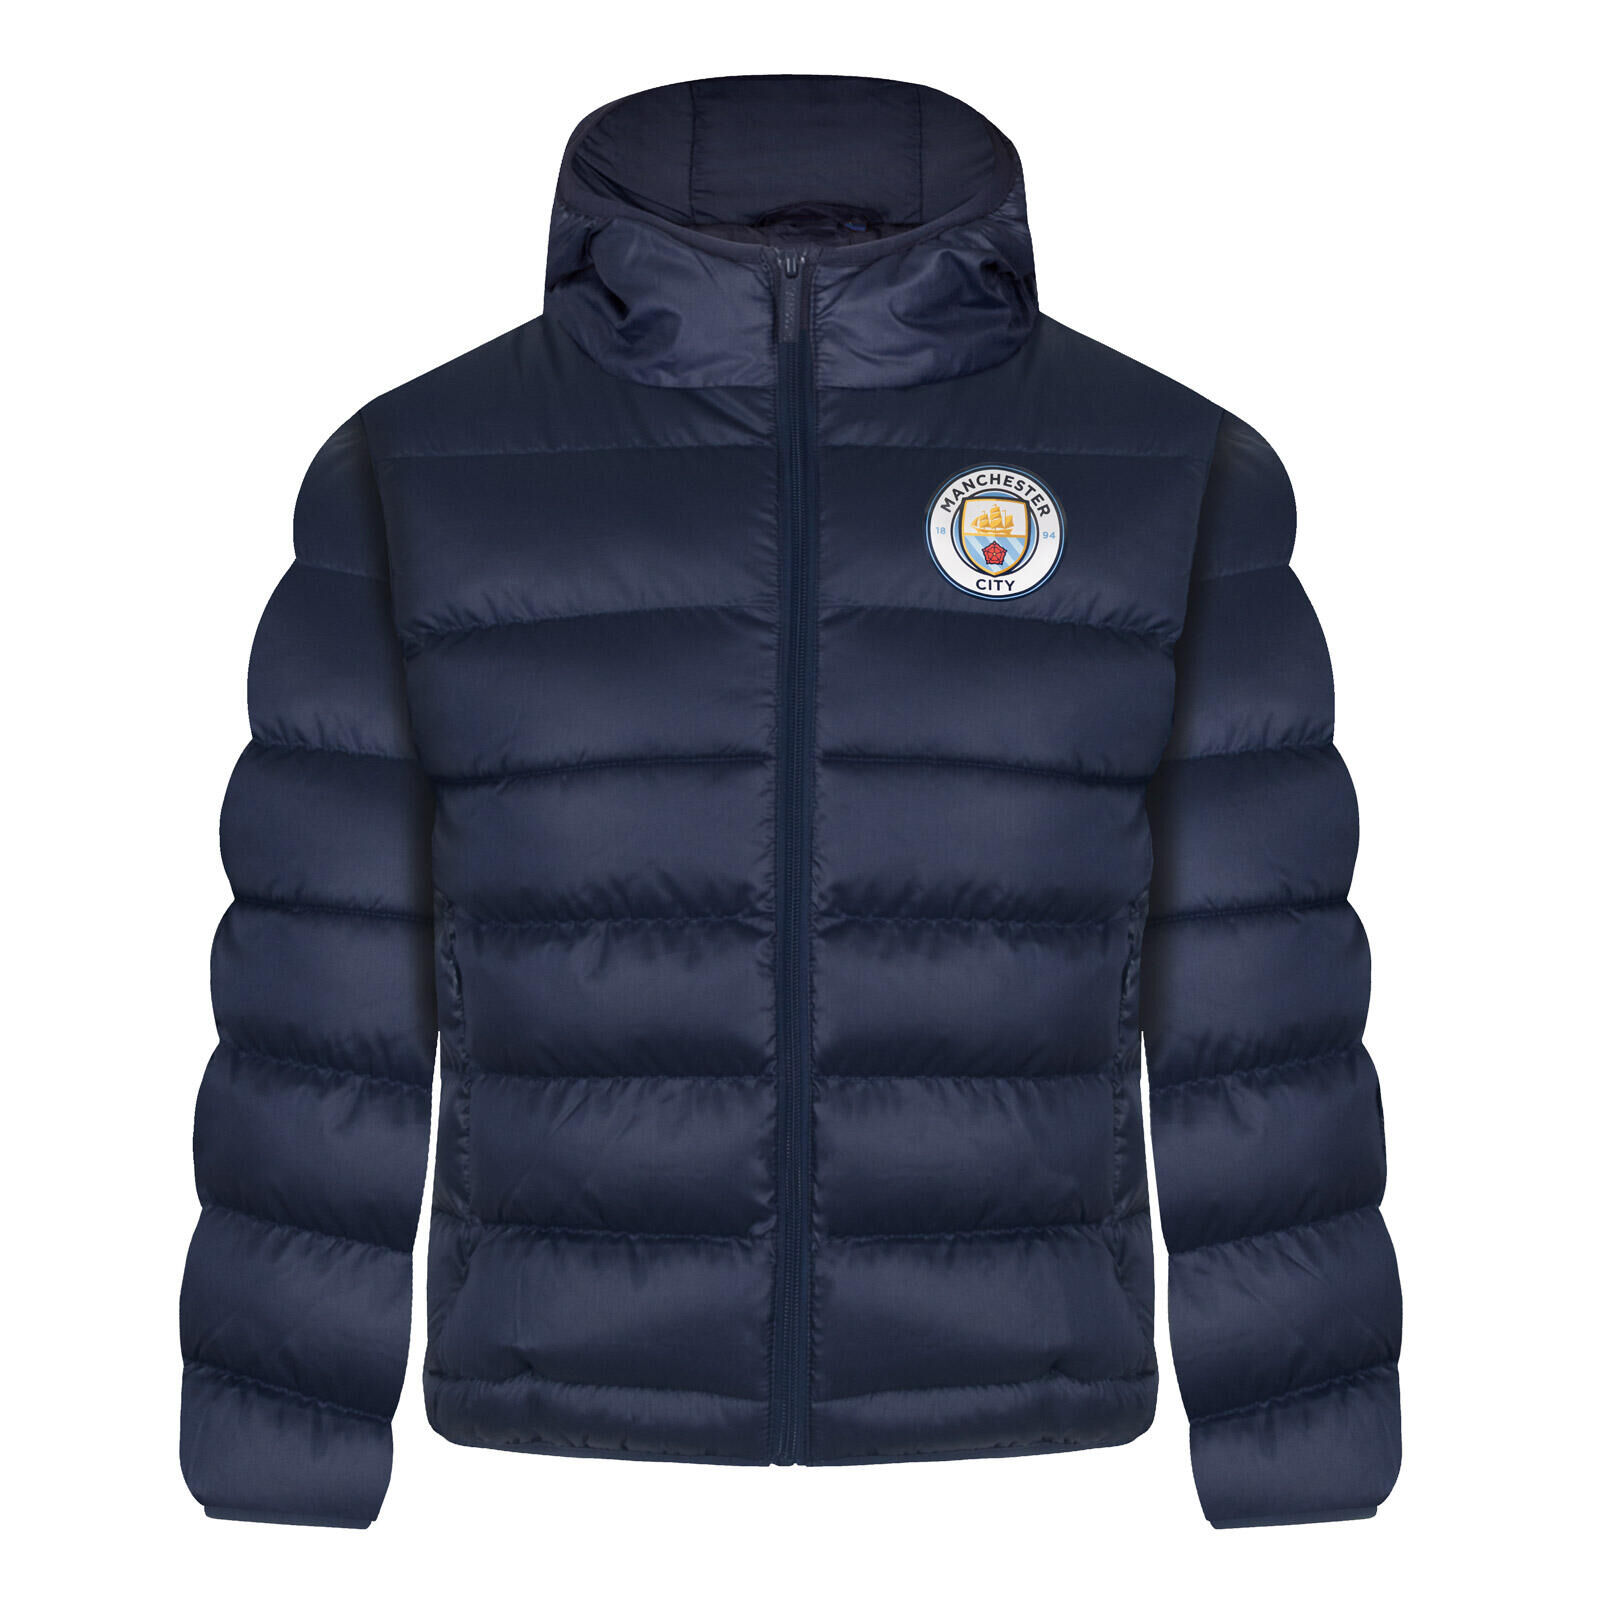 MANCHESTER CITY Manchester City Boys Jacket Hooded Winter Quilted Kids OFFICIAL Football Gift